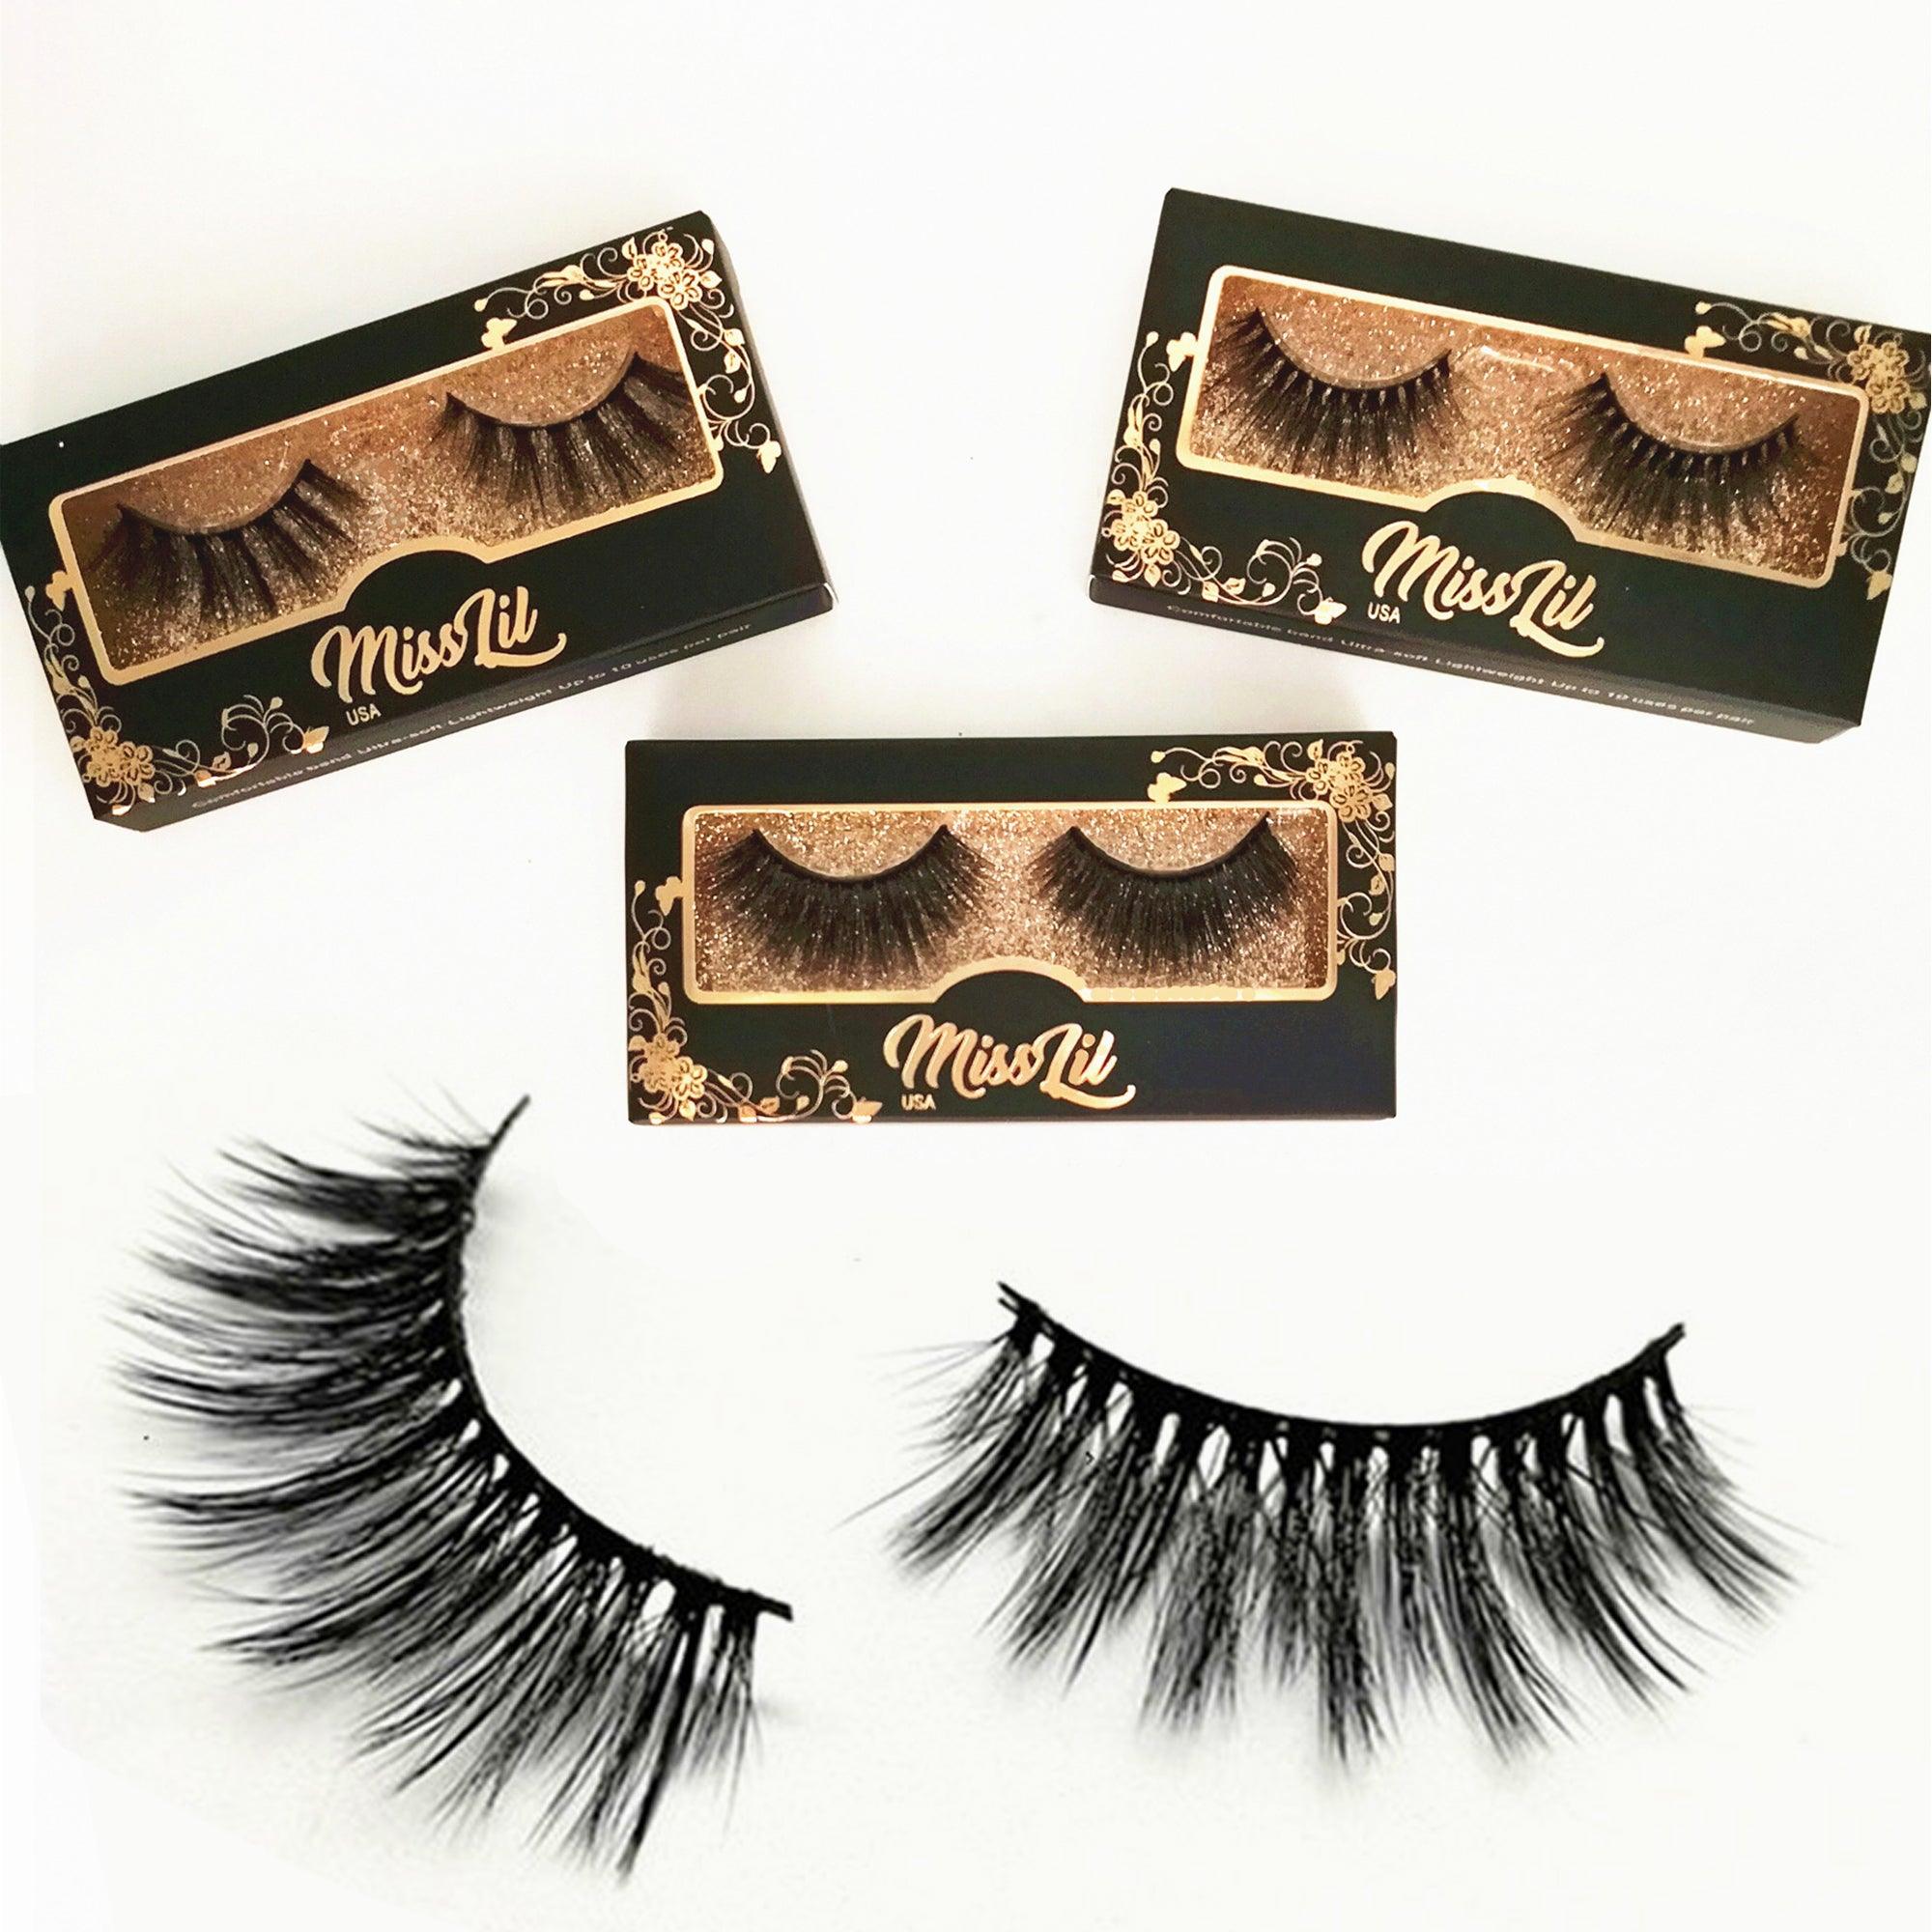 1-Pair Miss Lil USA Lashes #36 (Pack of 12) - Miss Lil USA Wholesale